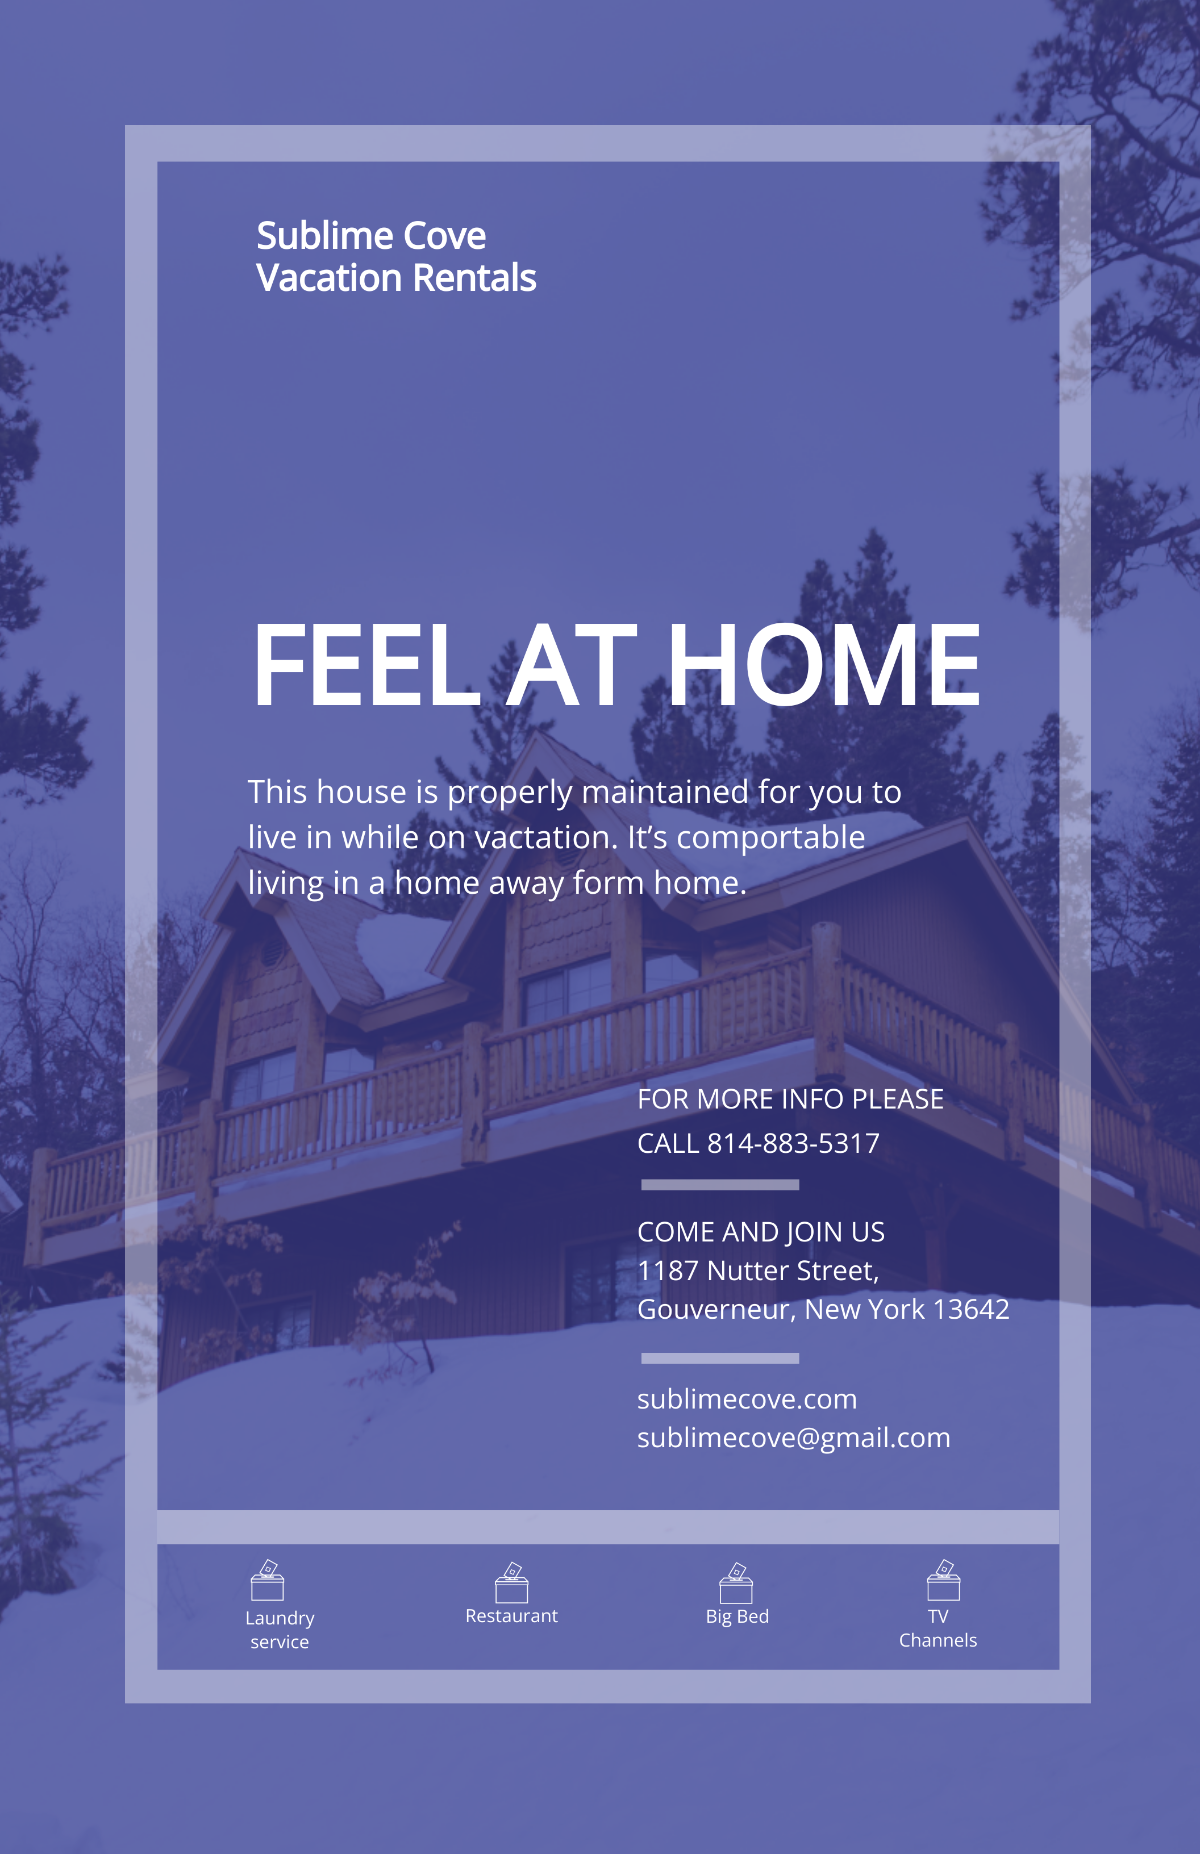 Vacation Rental Poster Template